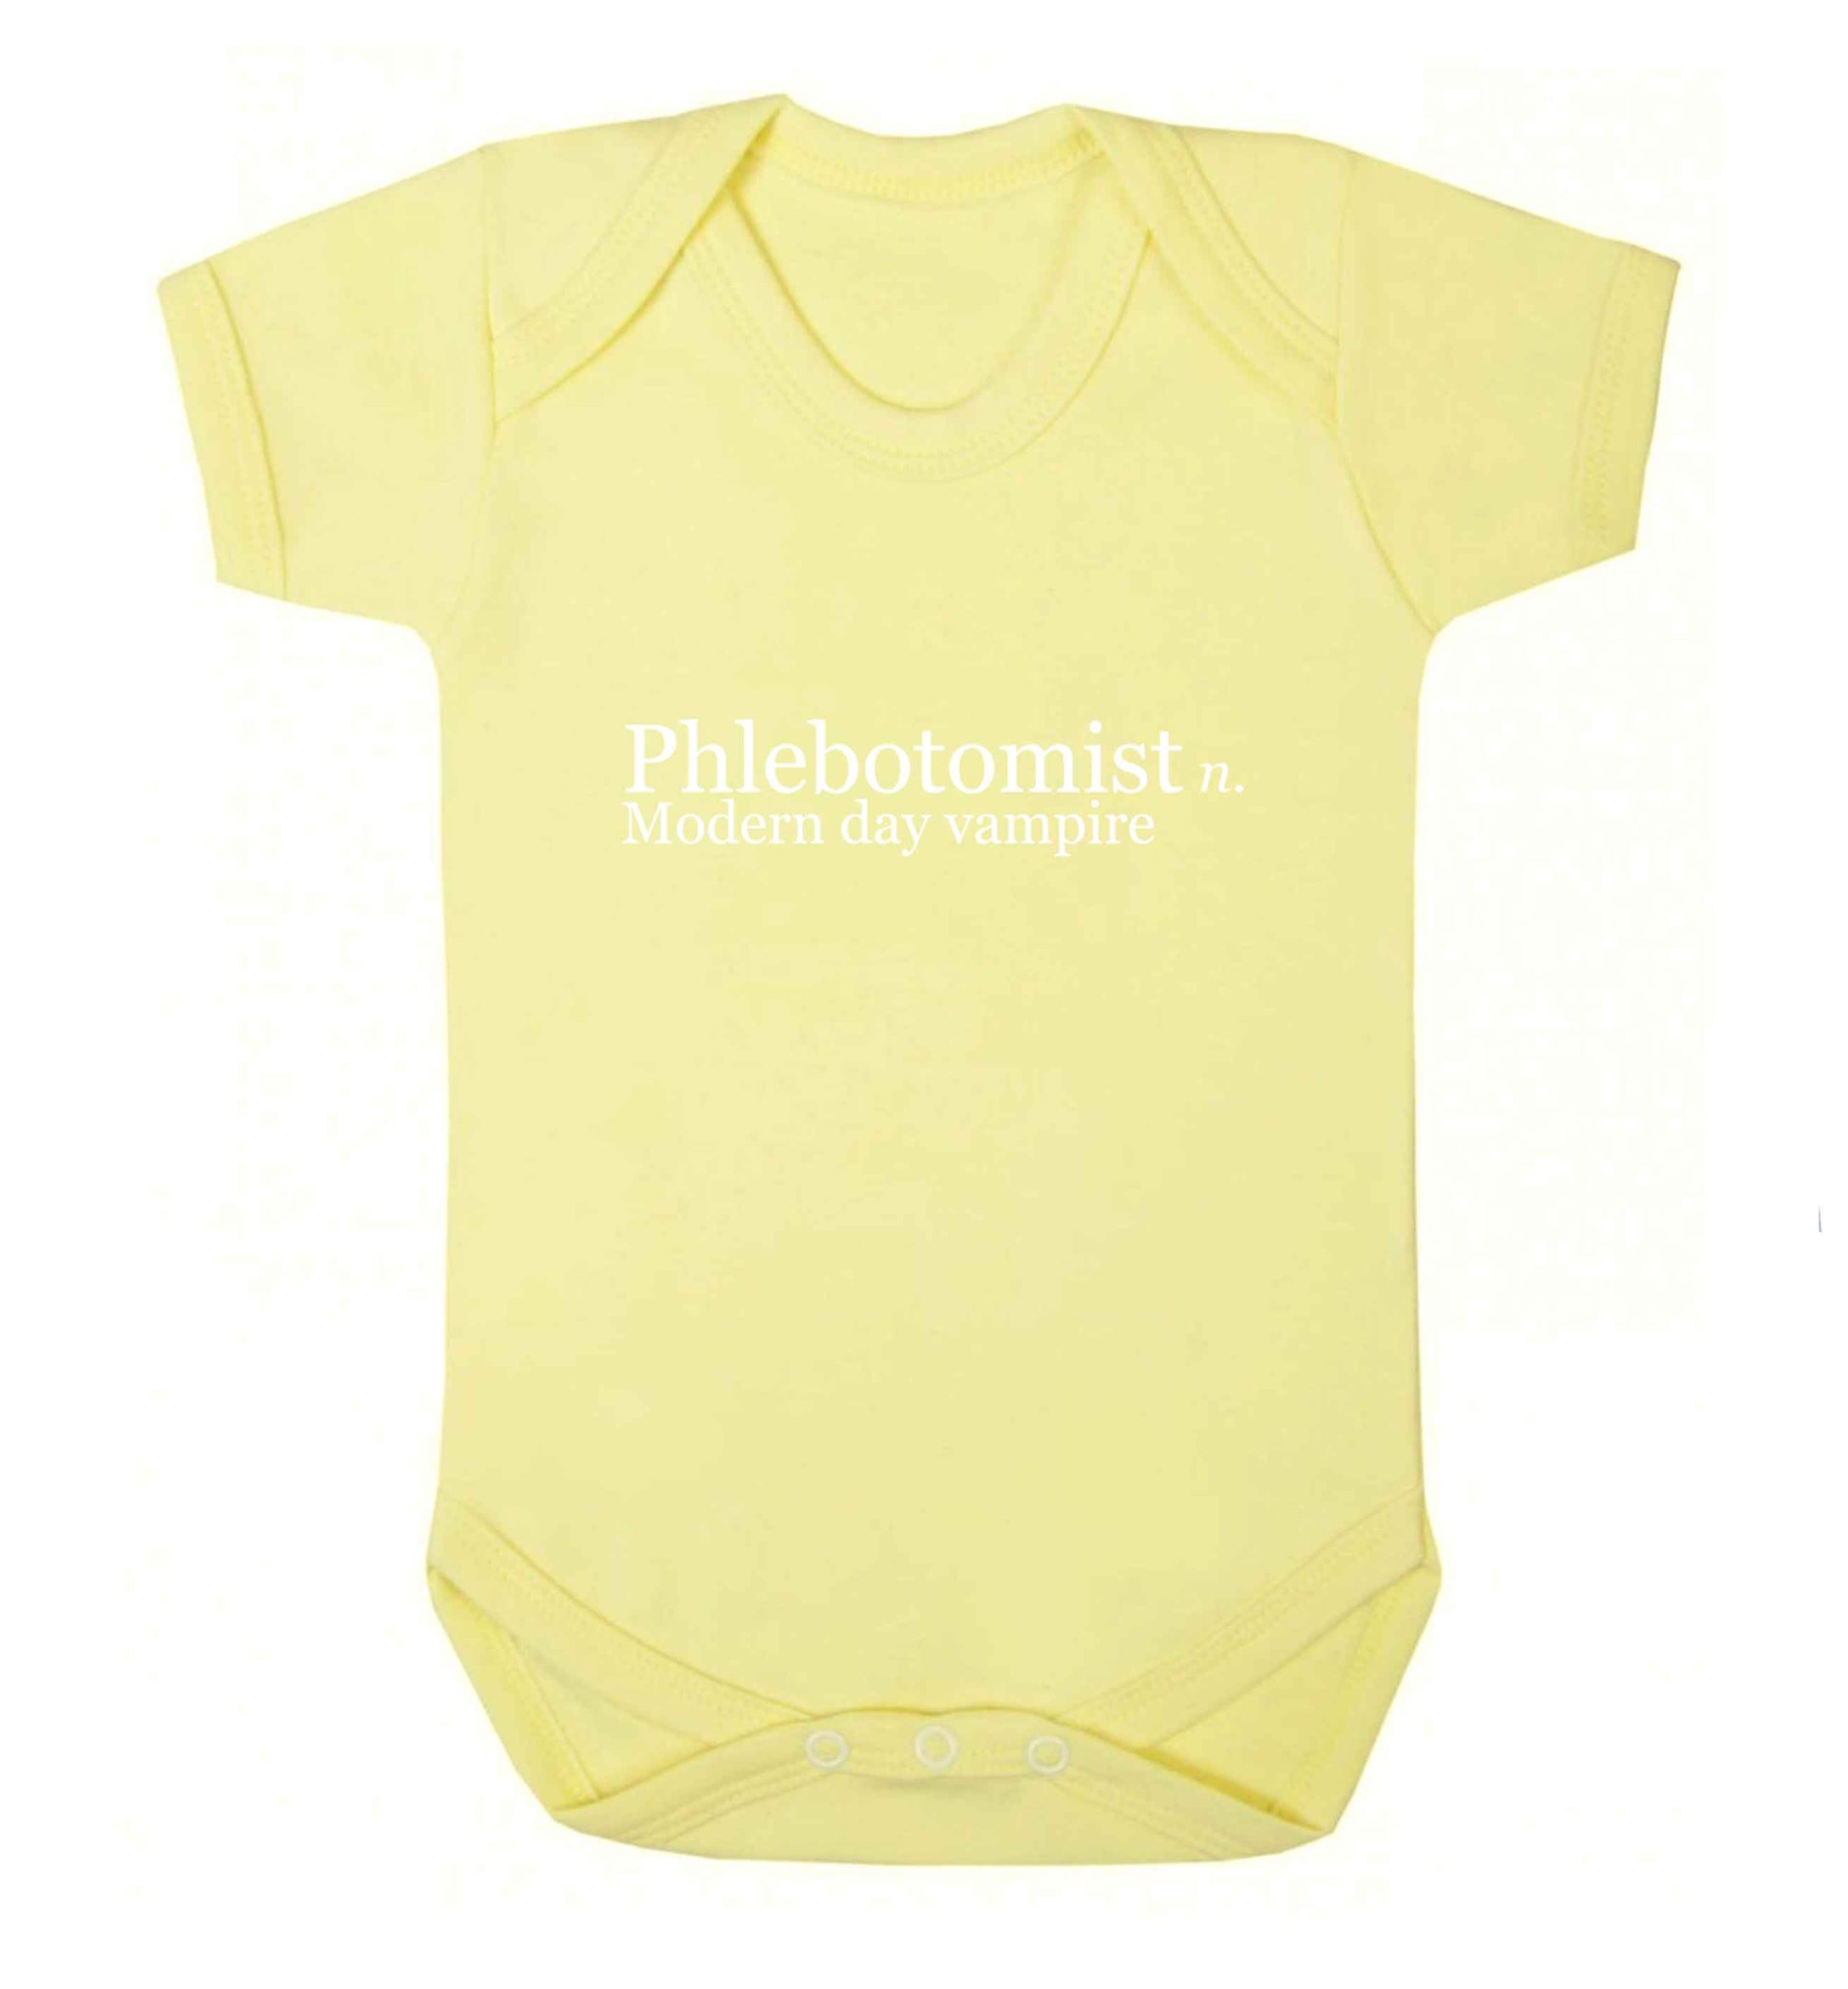 Phlebotomist - Modern day vampire baby vest pale yellow 18-24 months